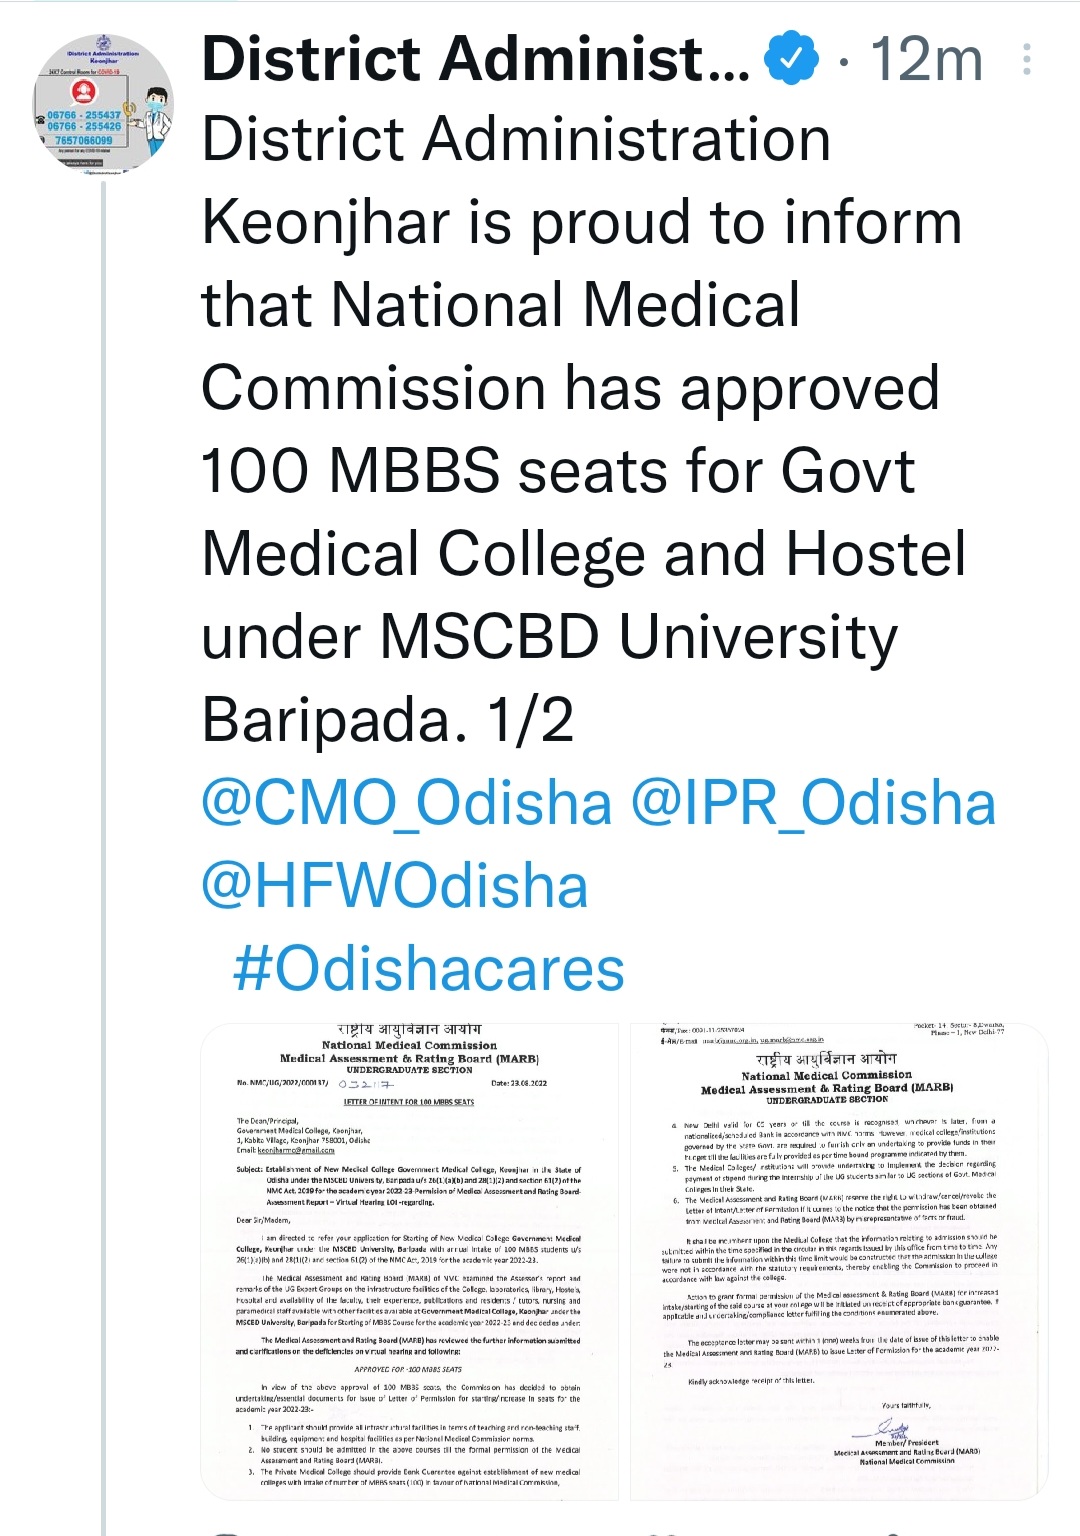 MBBS seat approved in Keonjhar Medical College